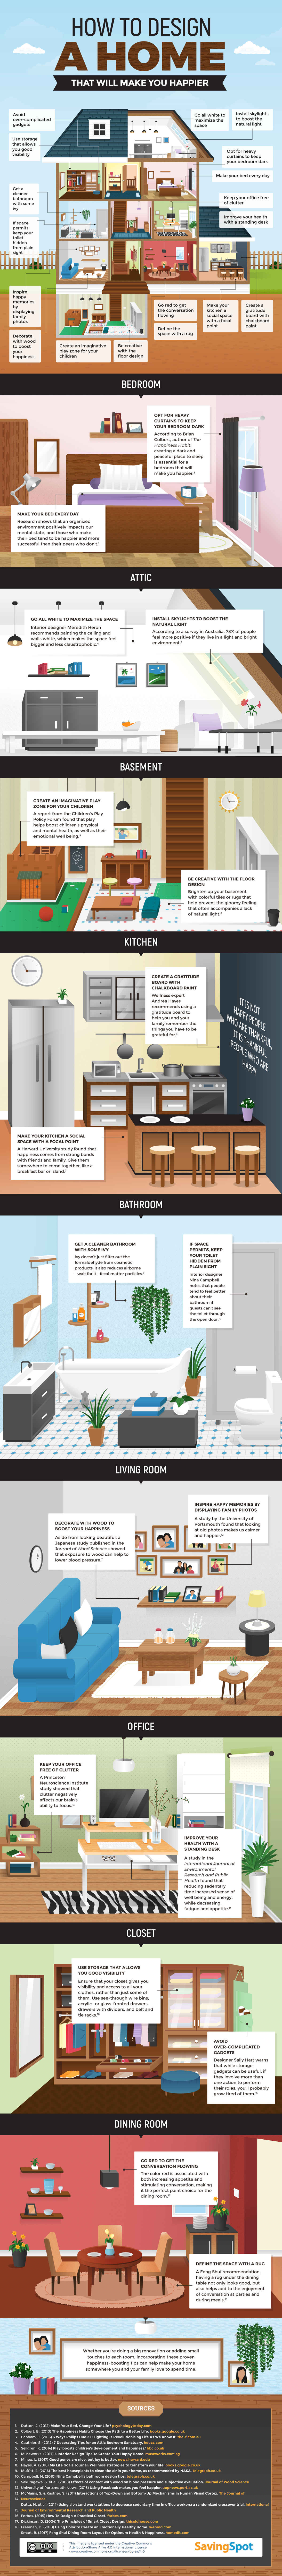 How To Design A Happy Home [Infographic]